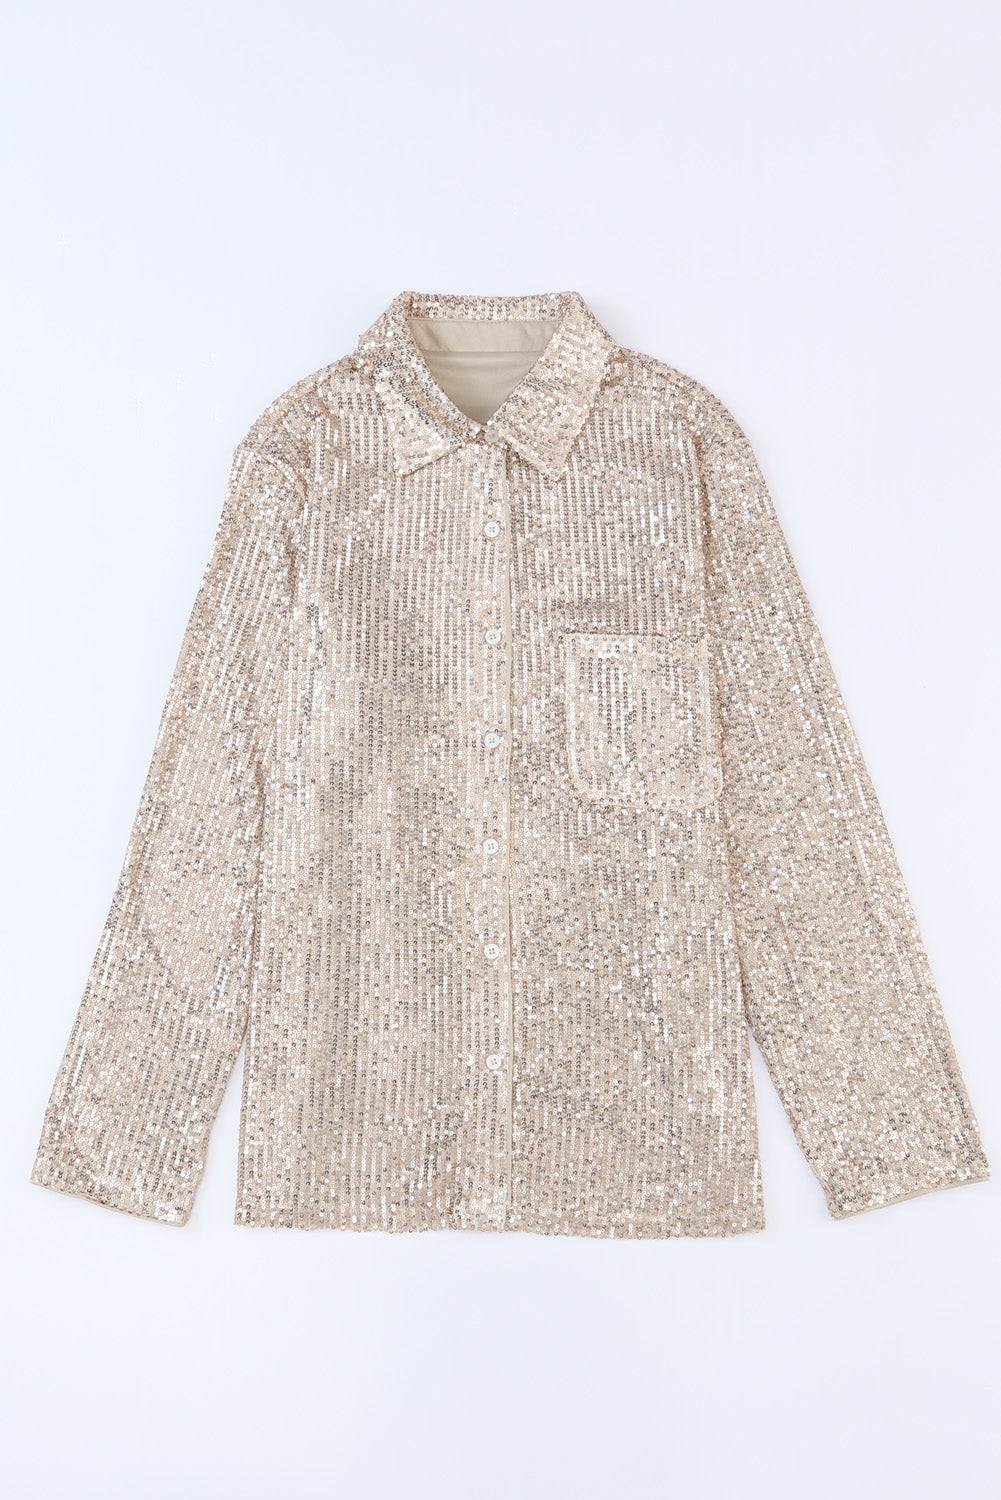 Apricot Sequin Collared Bust Pocket Buttoned Shirt